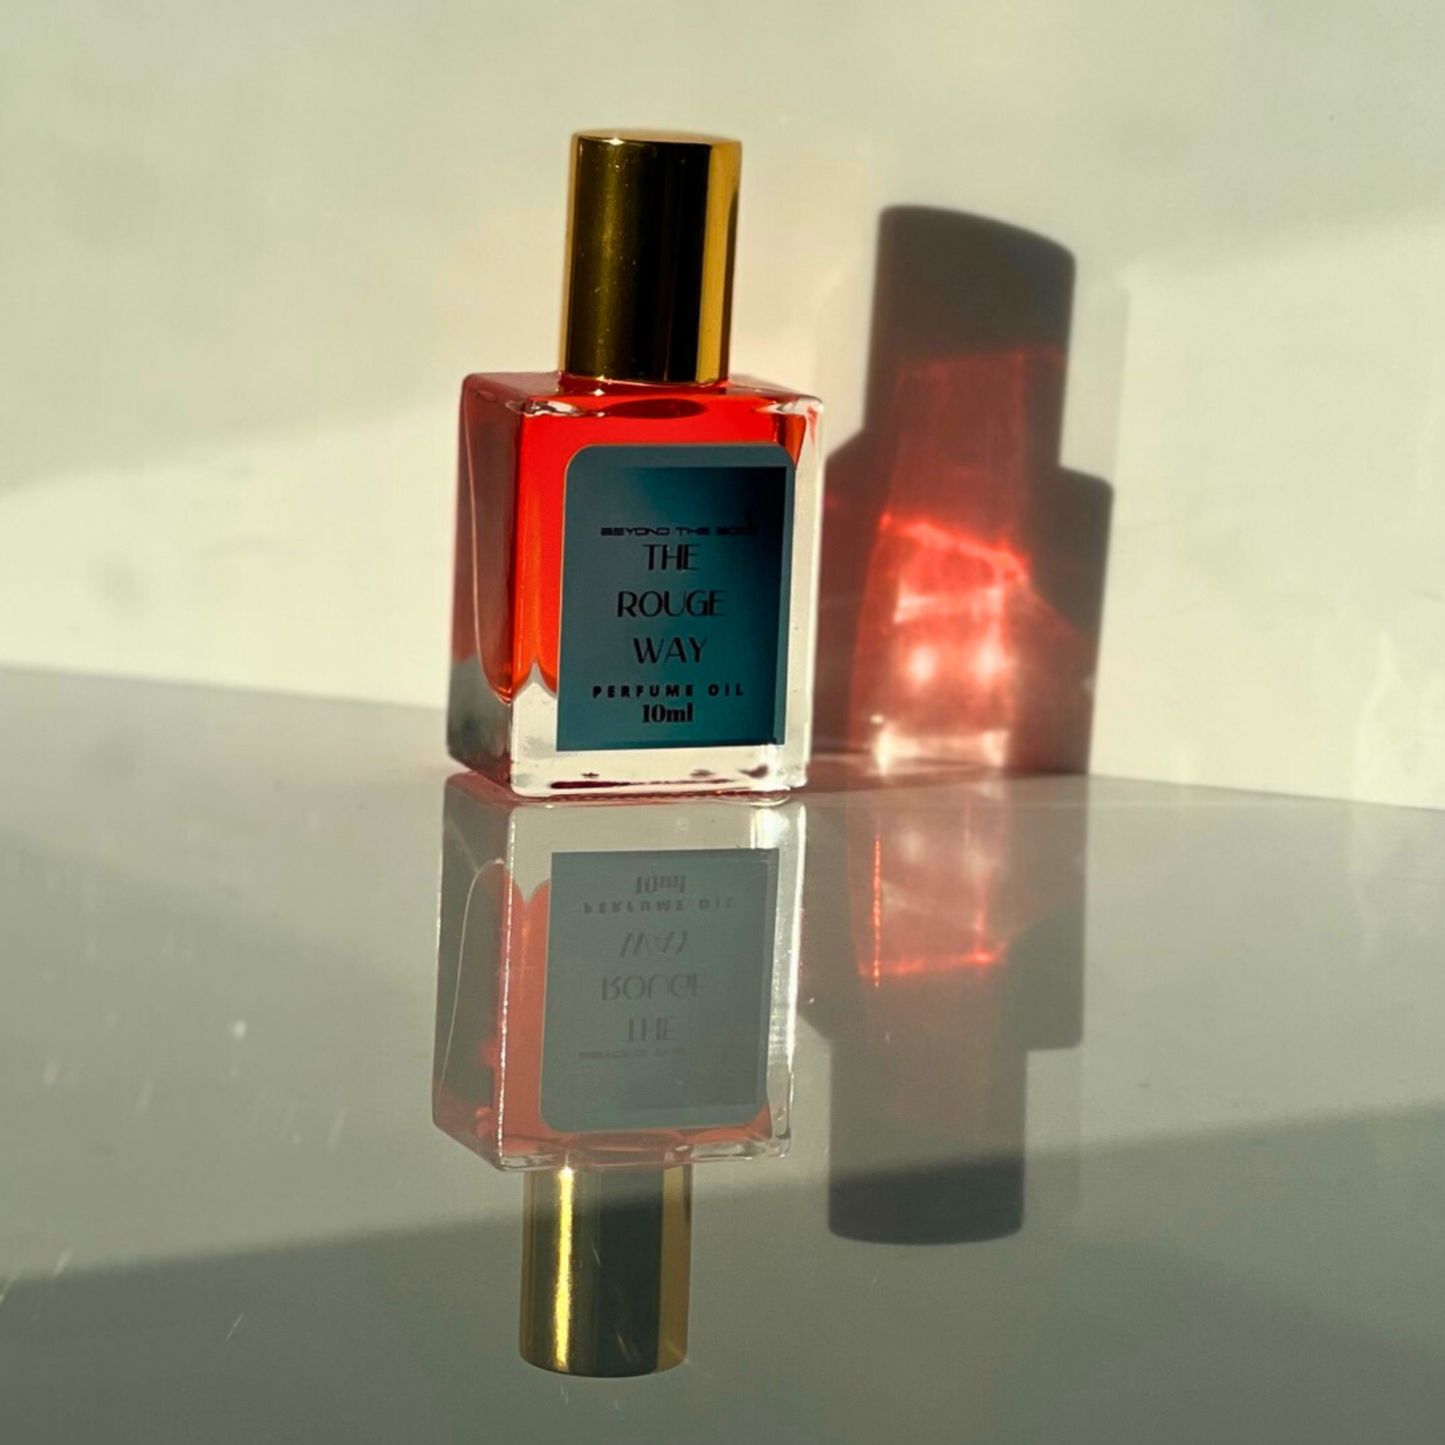 The Rouge Way (Baccarat Rouge Inspired) Perfume Oil